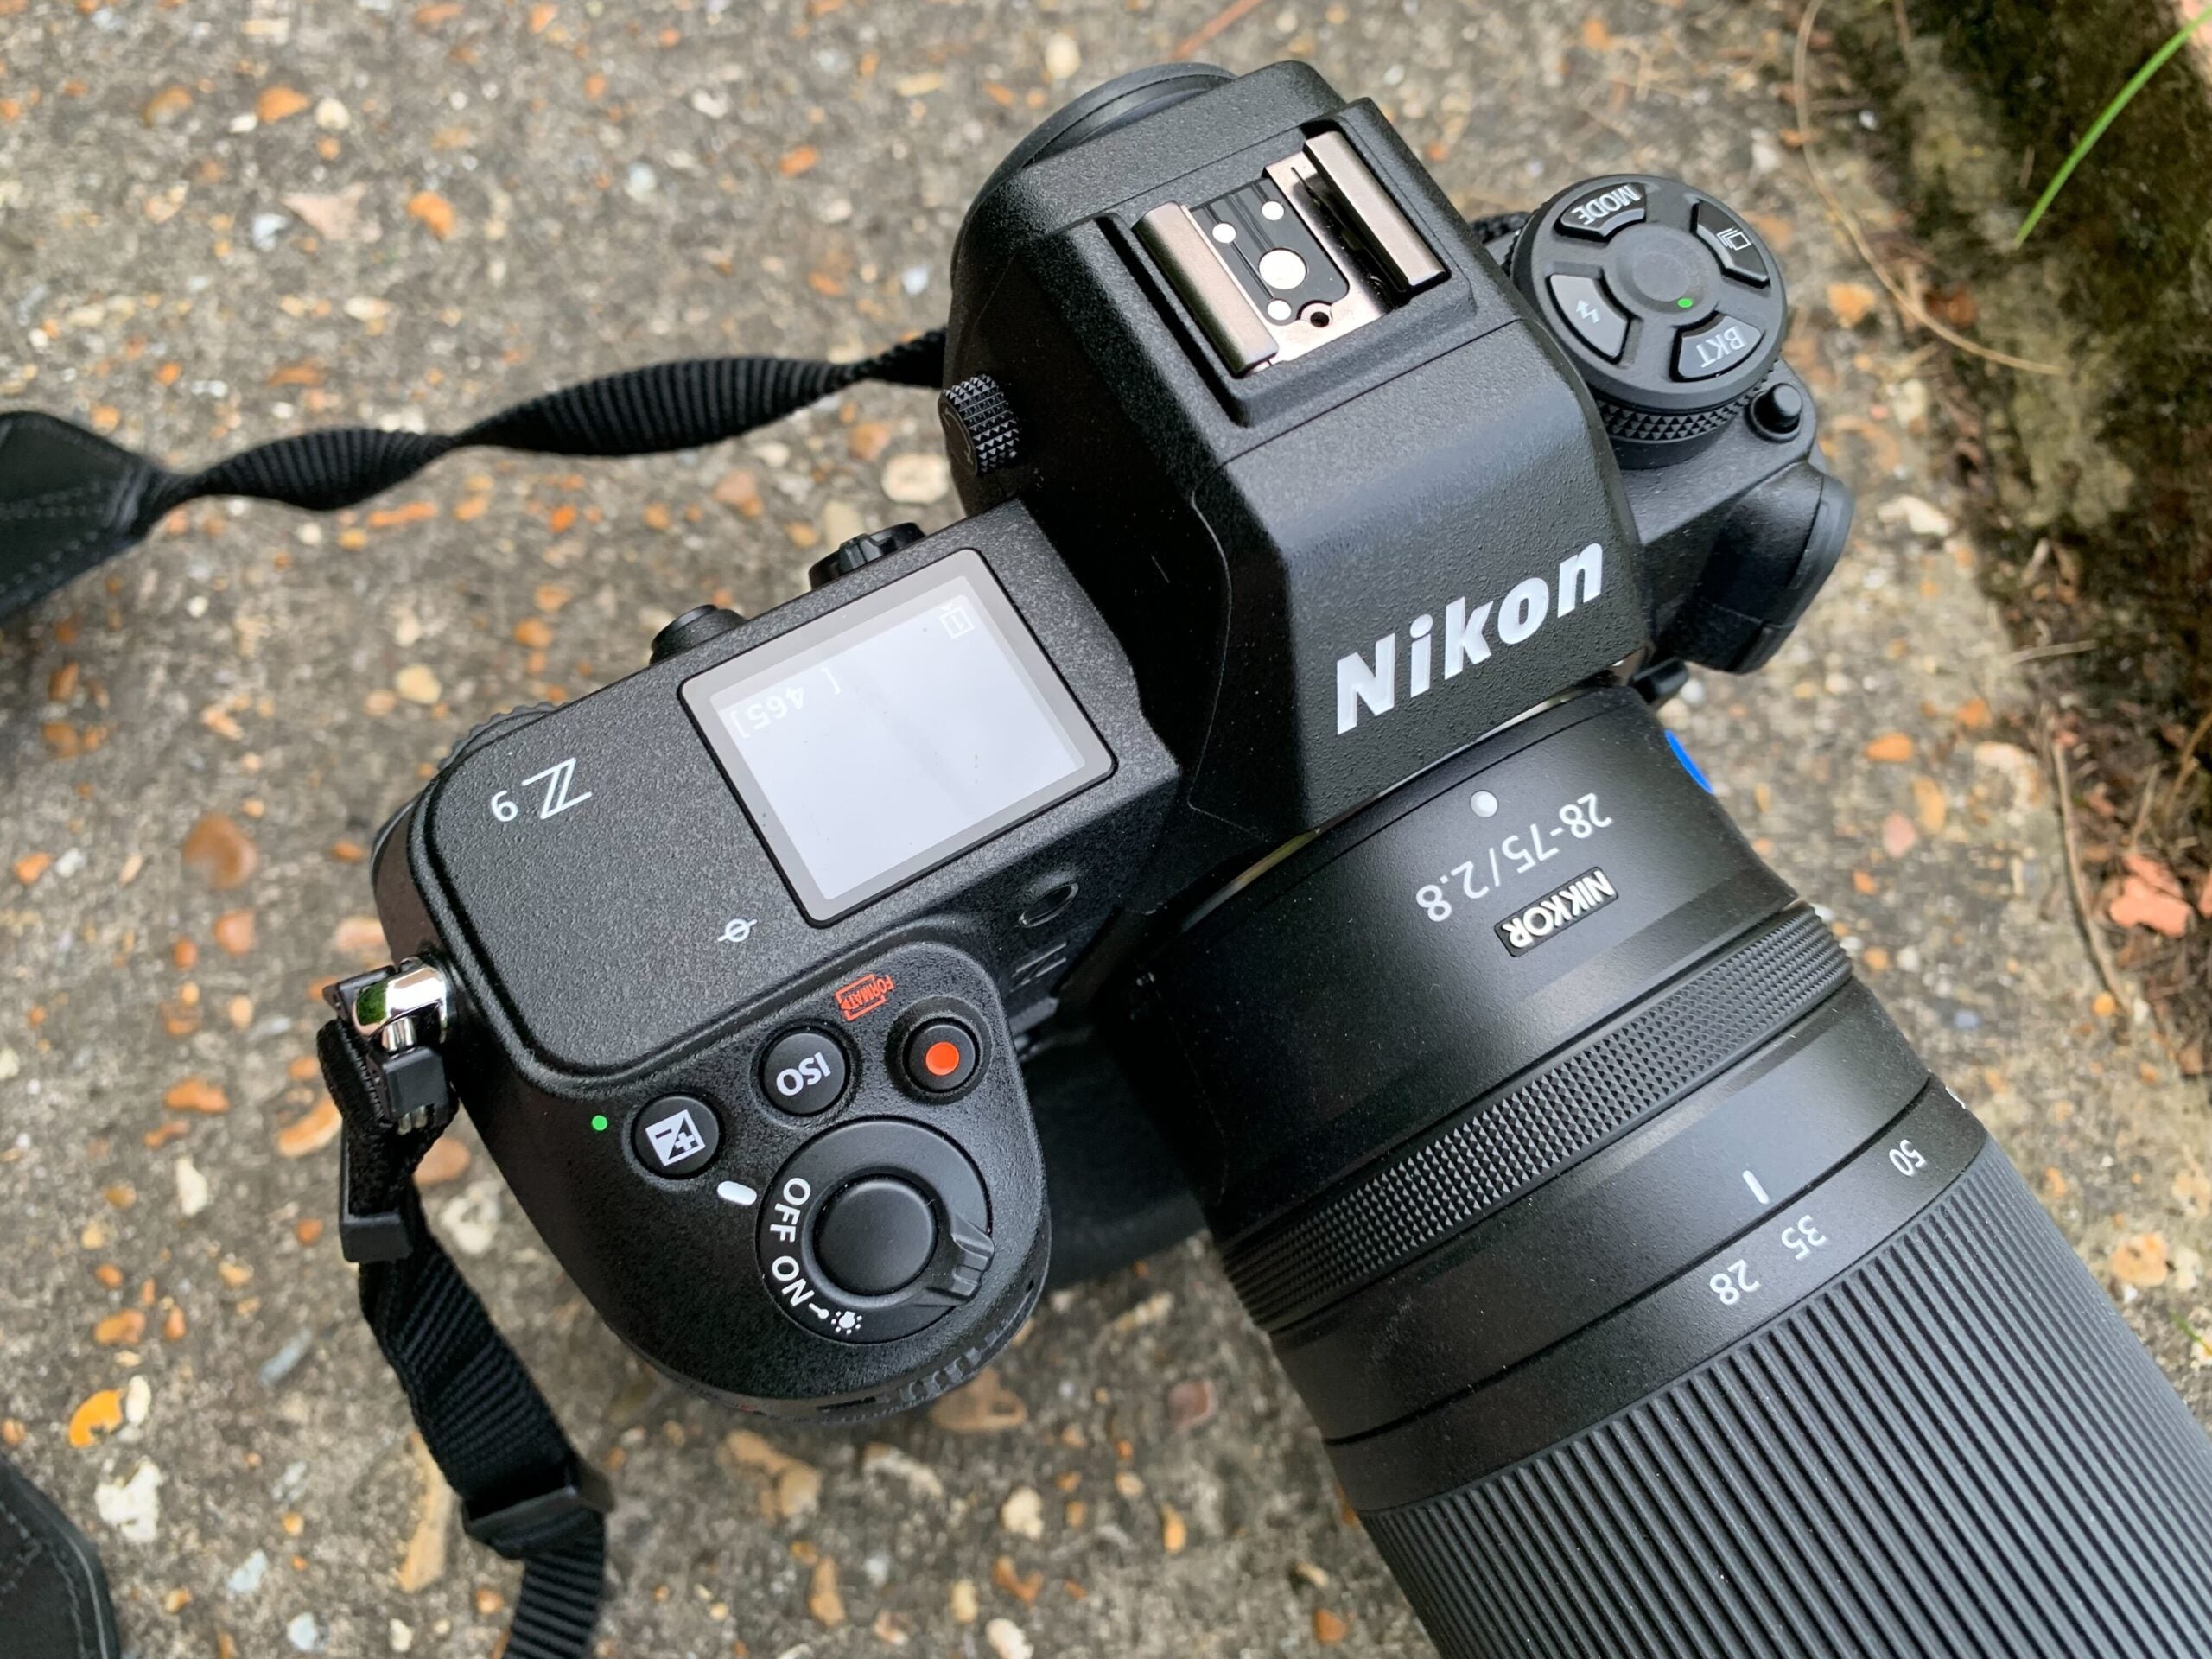 Fine threshold overlook Best camera for photography: All the top cameras we've tested